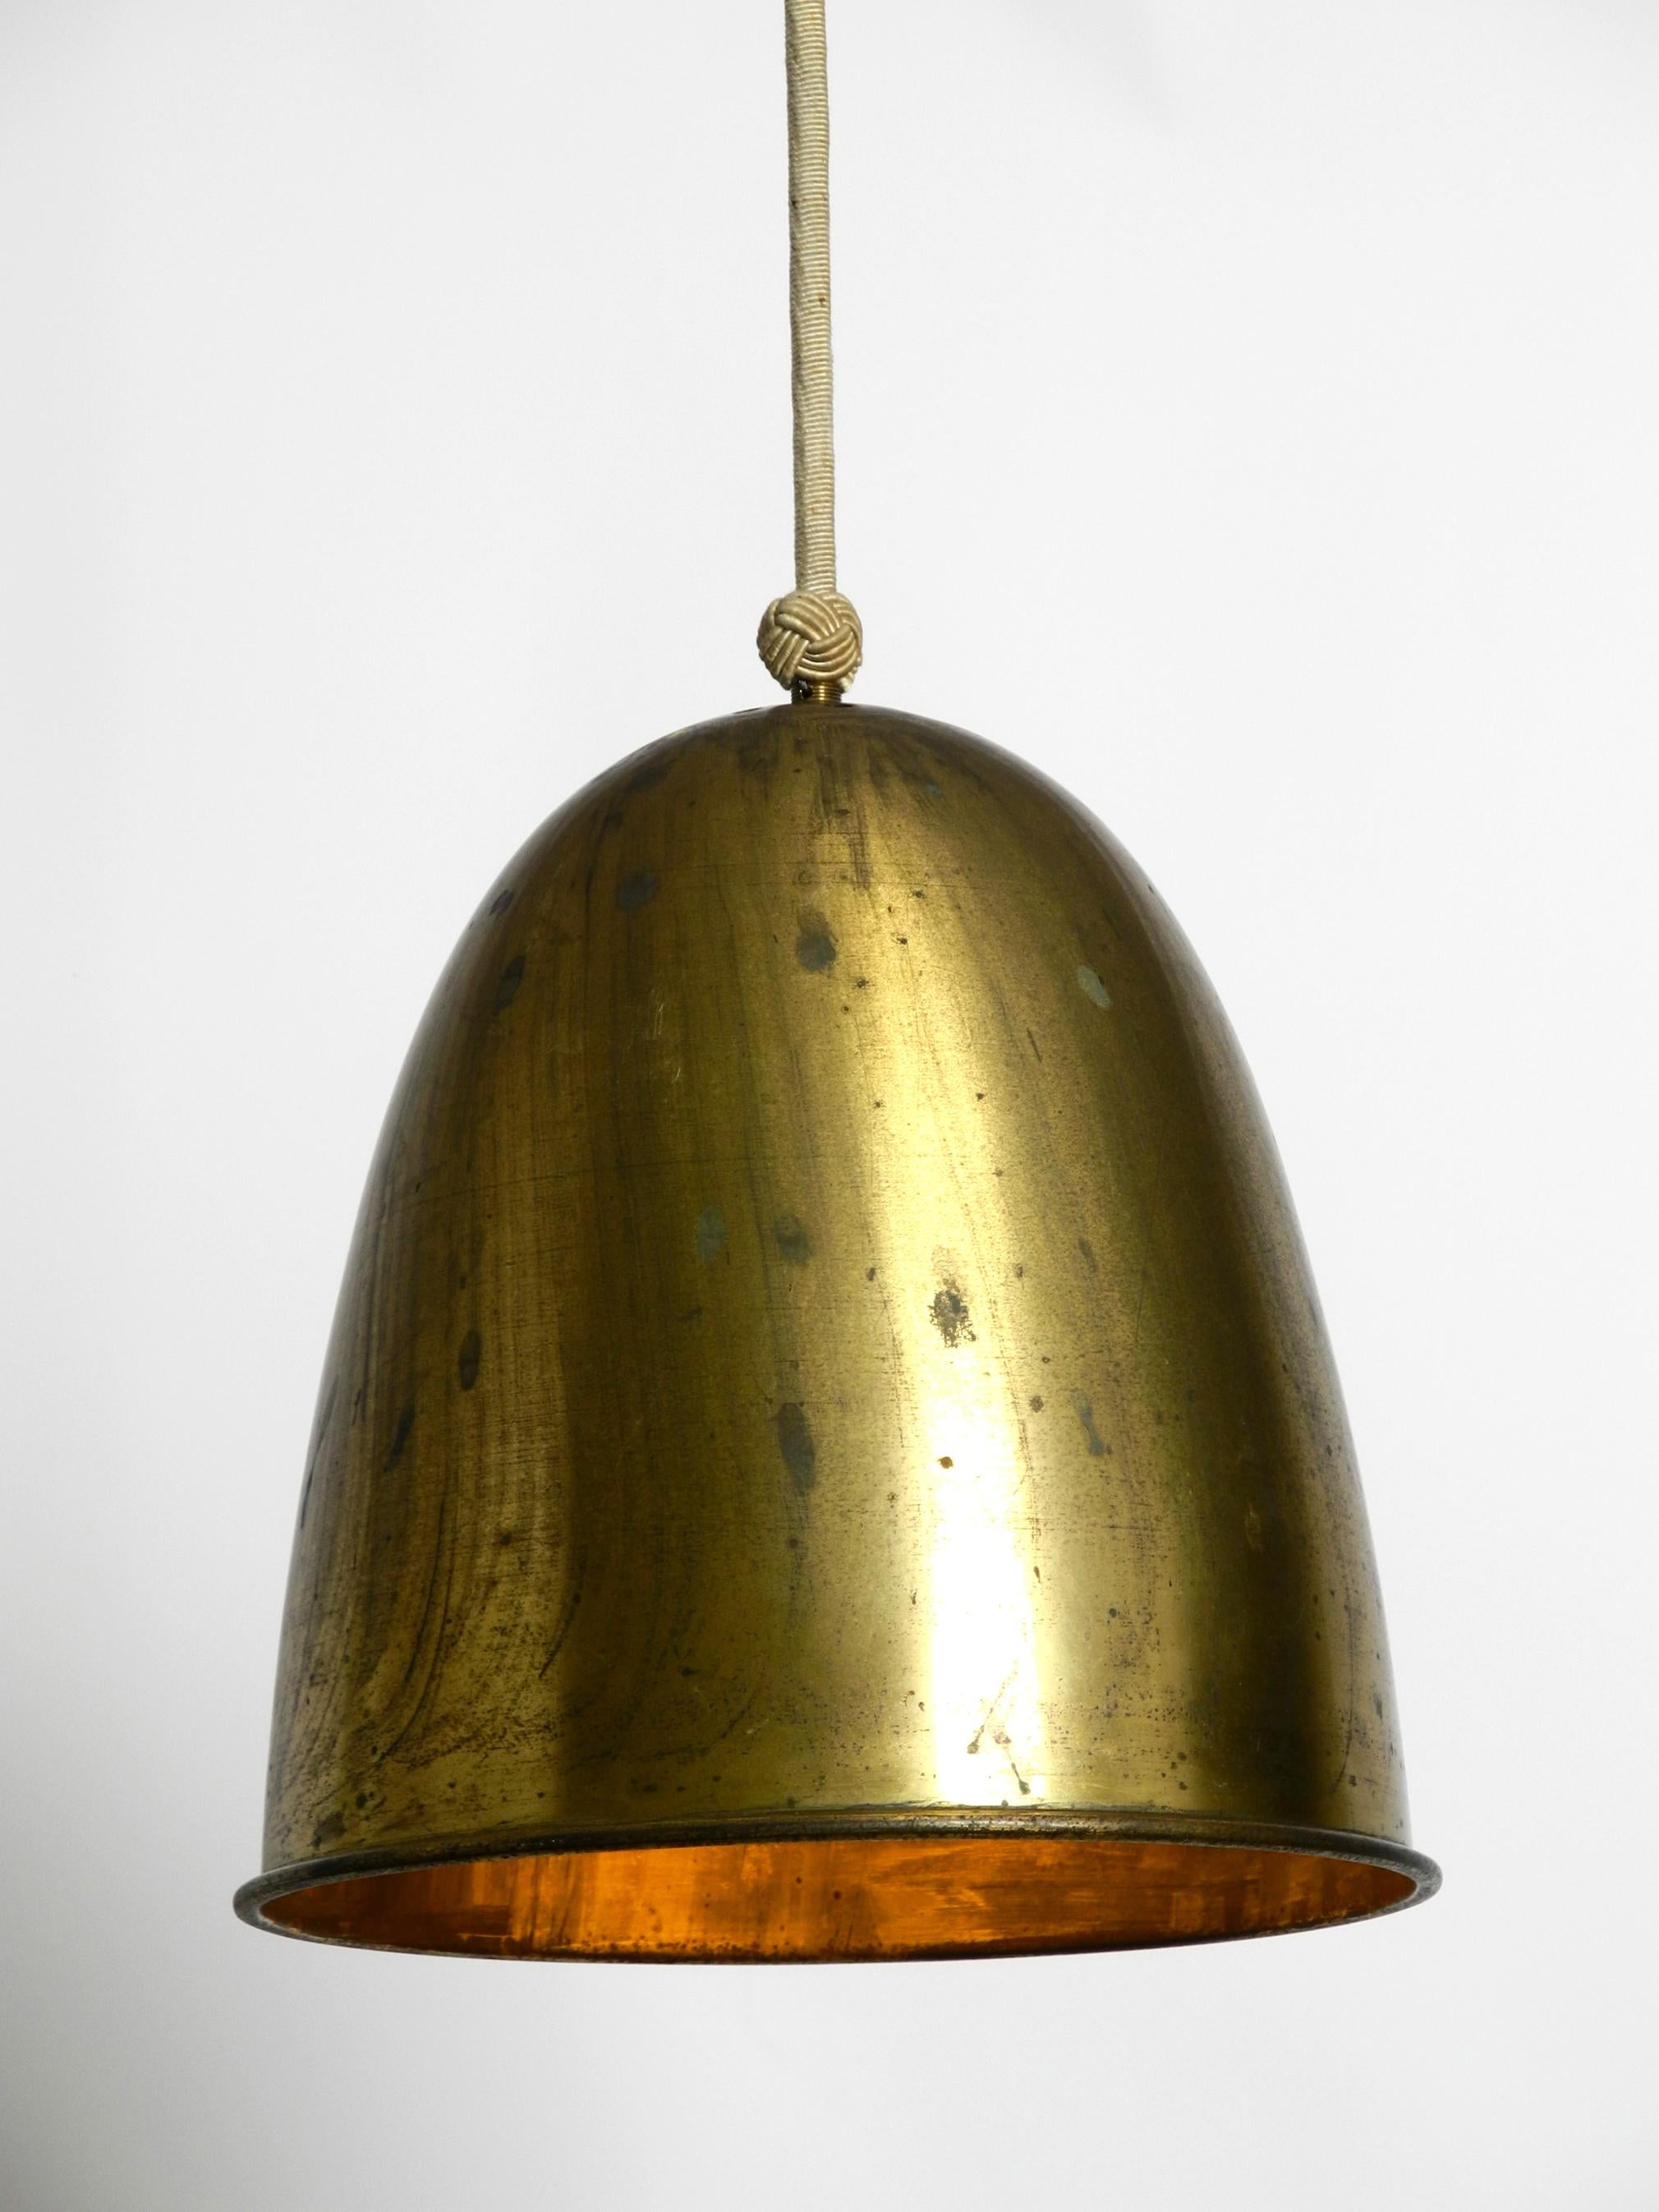 Exceptional Large Heavy Midcentury Brass Pendant Lamp with 3 Sockets 8